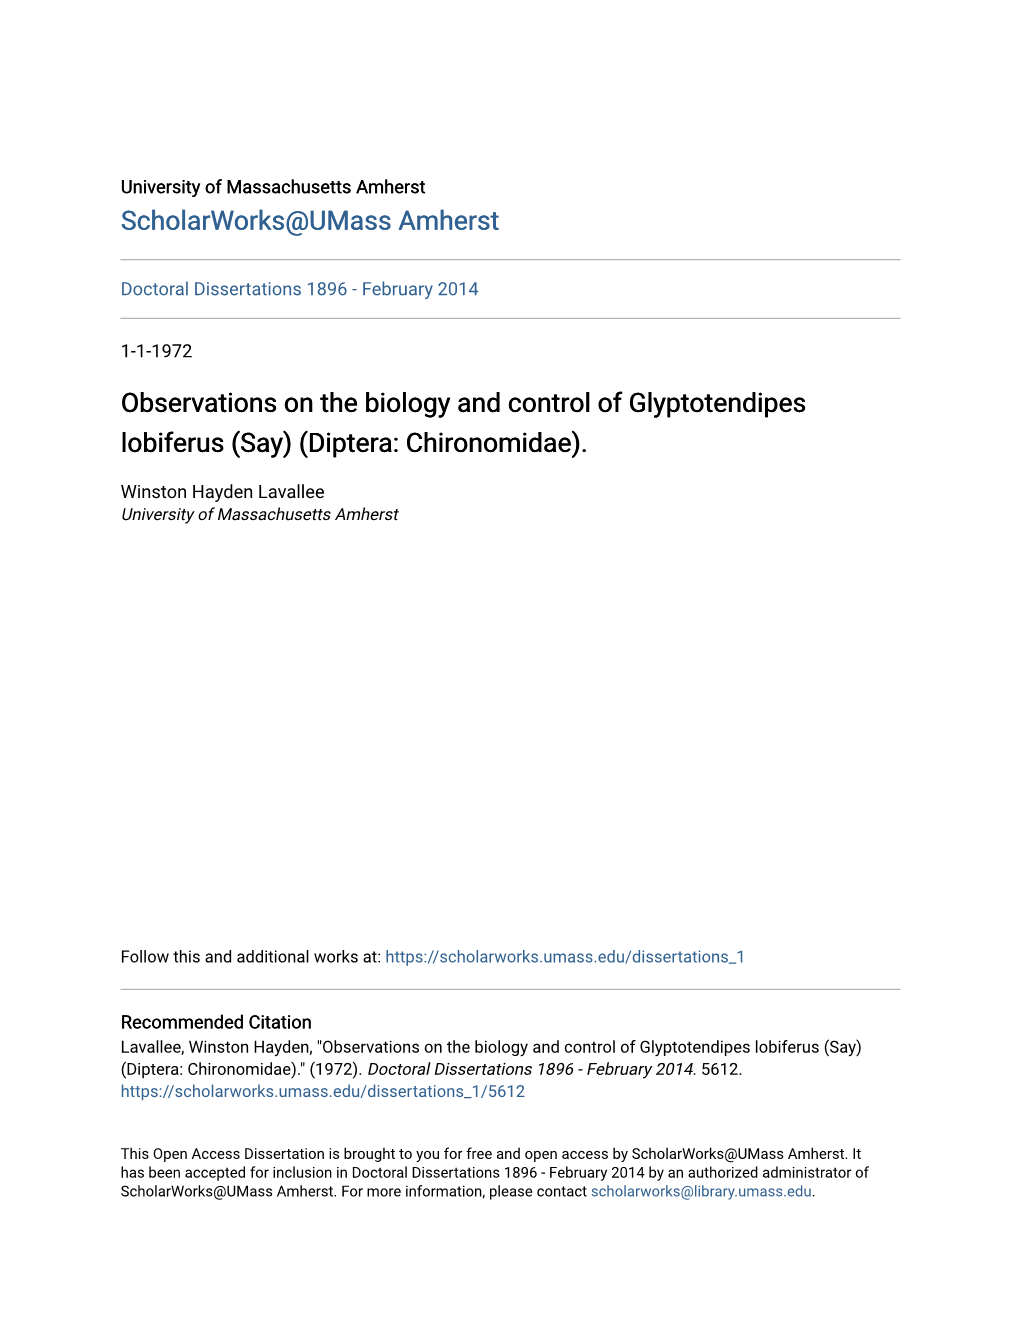 Observations on the Biology and Control of Glyptotendipes Lobiferus (Say) (Diptera: Chironomidae)